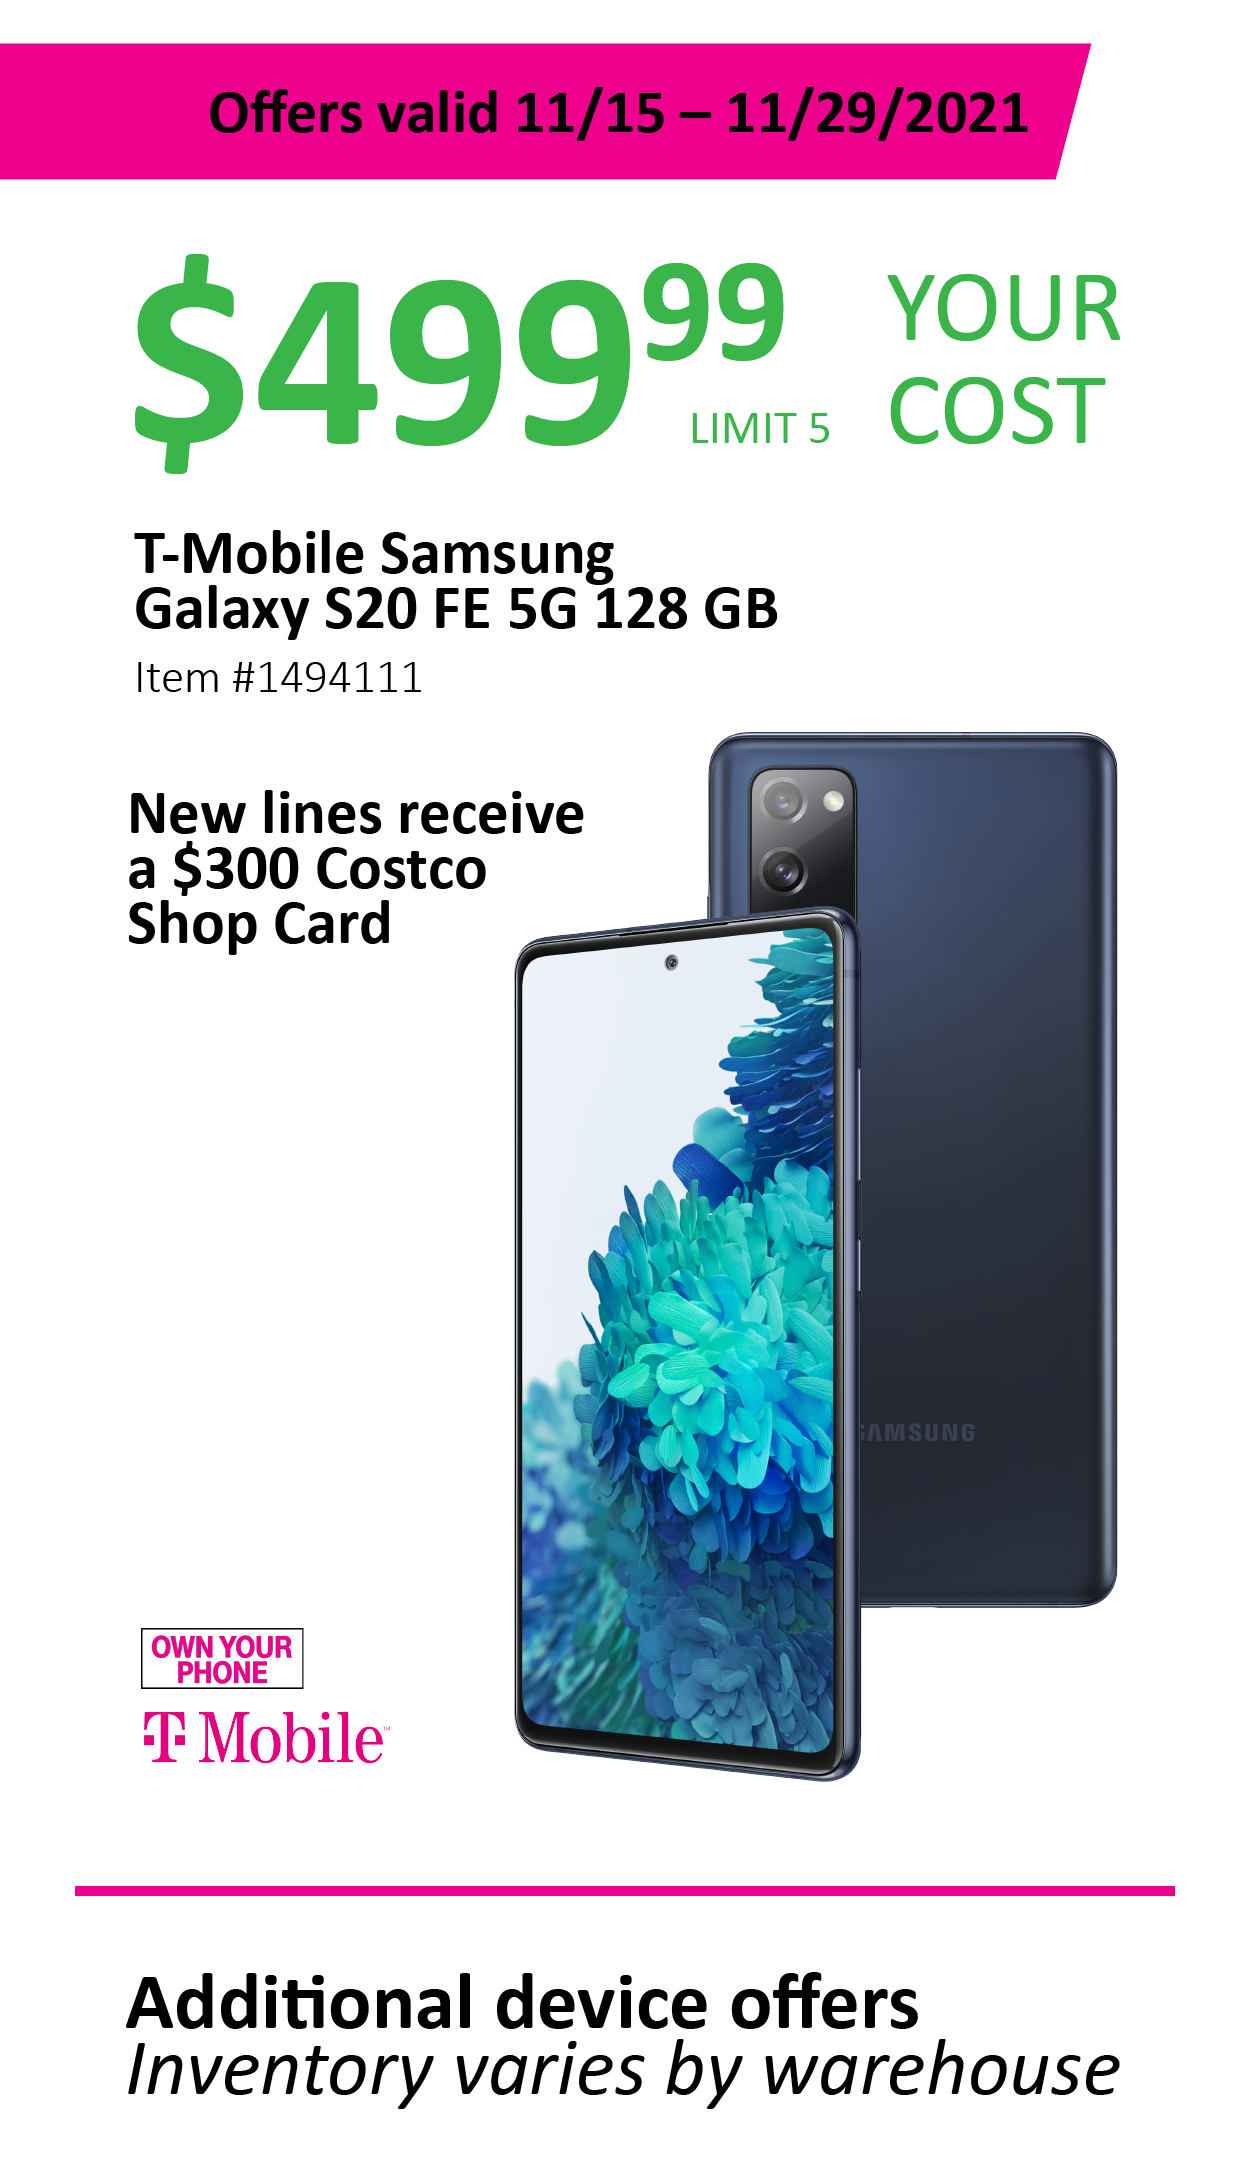 Tmobile & Samsung Deal - Get $300 Costco Card, prices start at $500 for S20 FE, $800 for Samsung Galaxy Z Flip3 $200